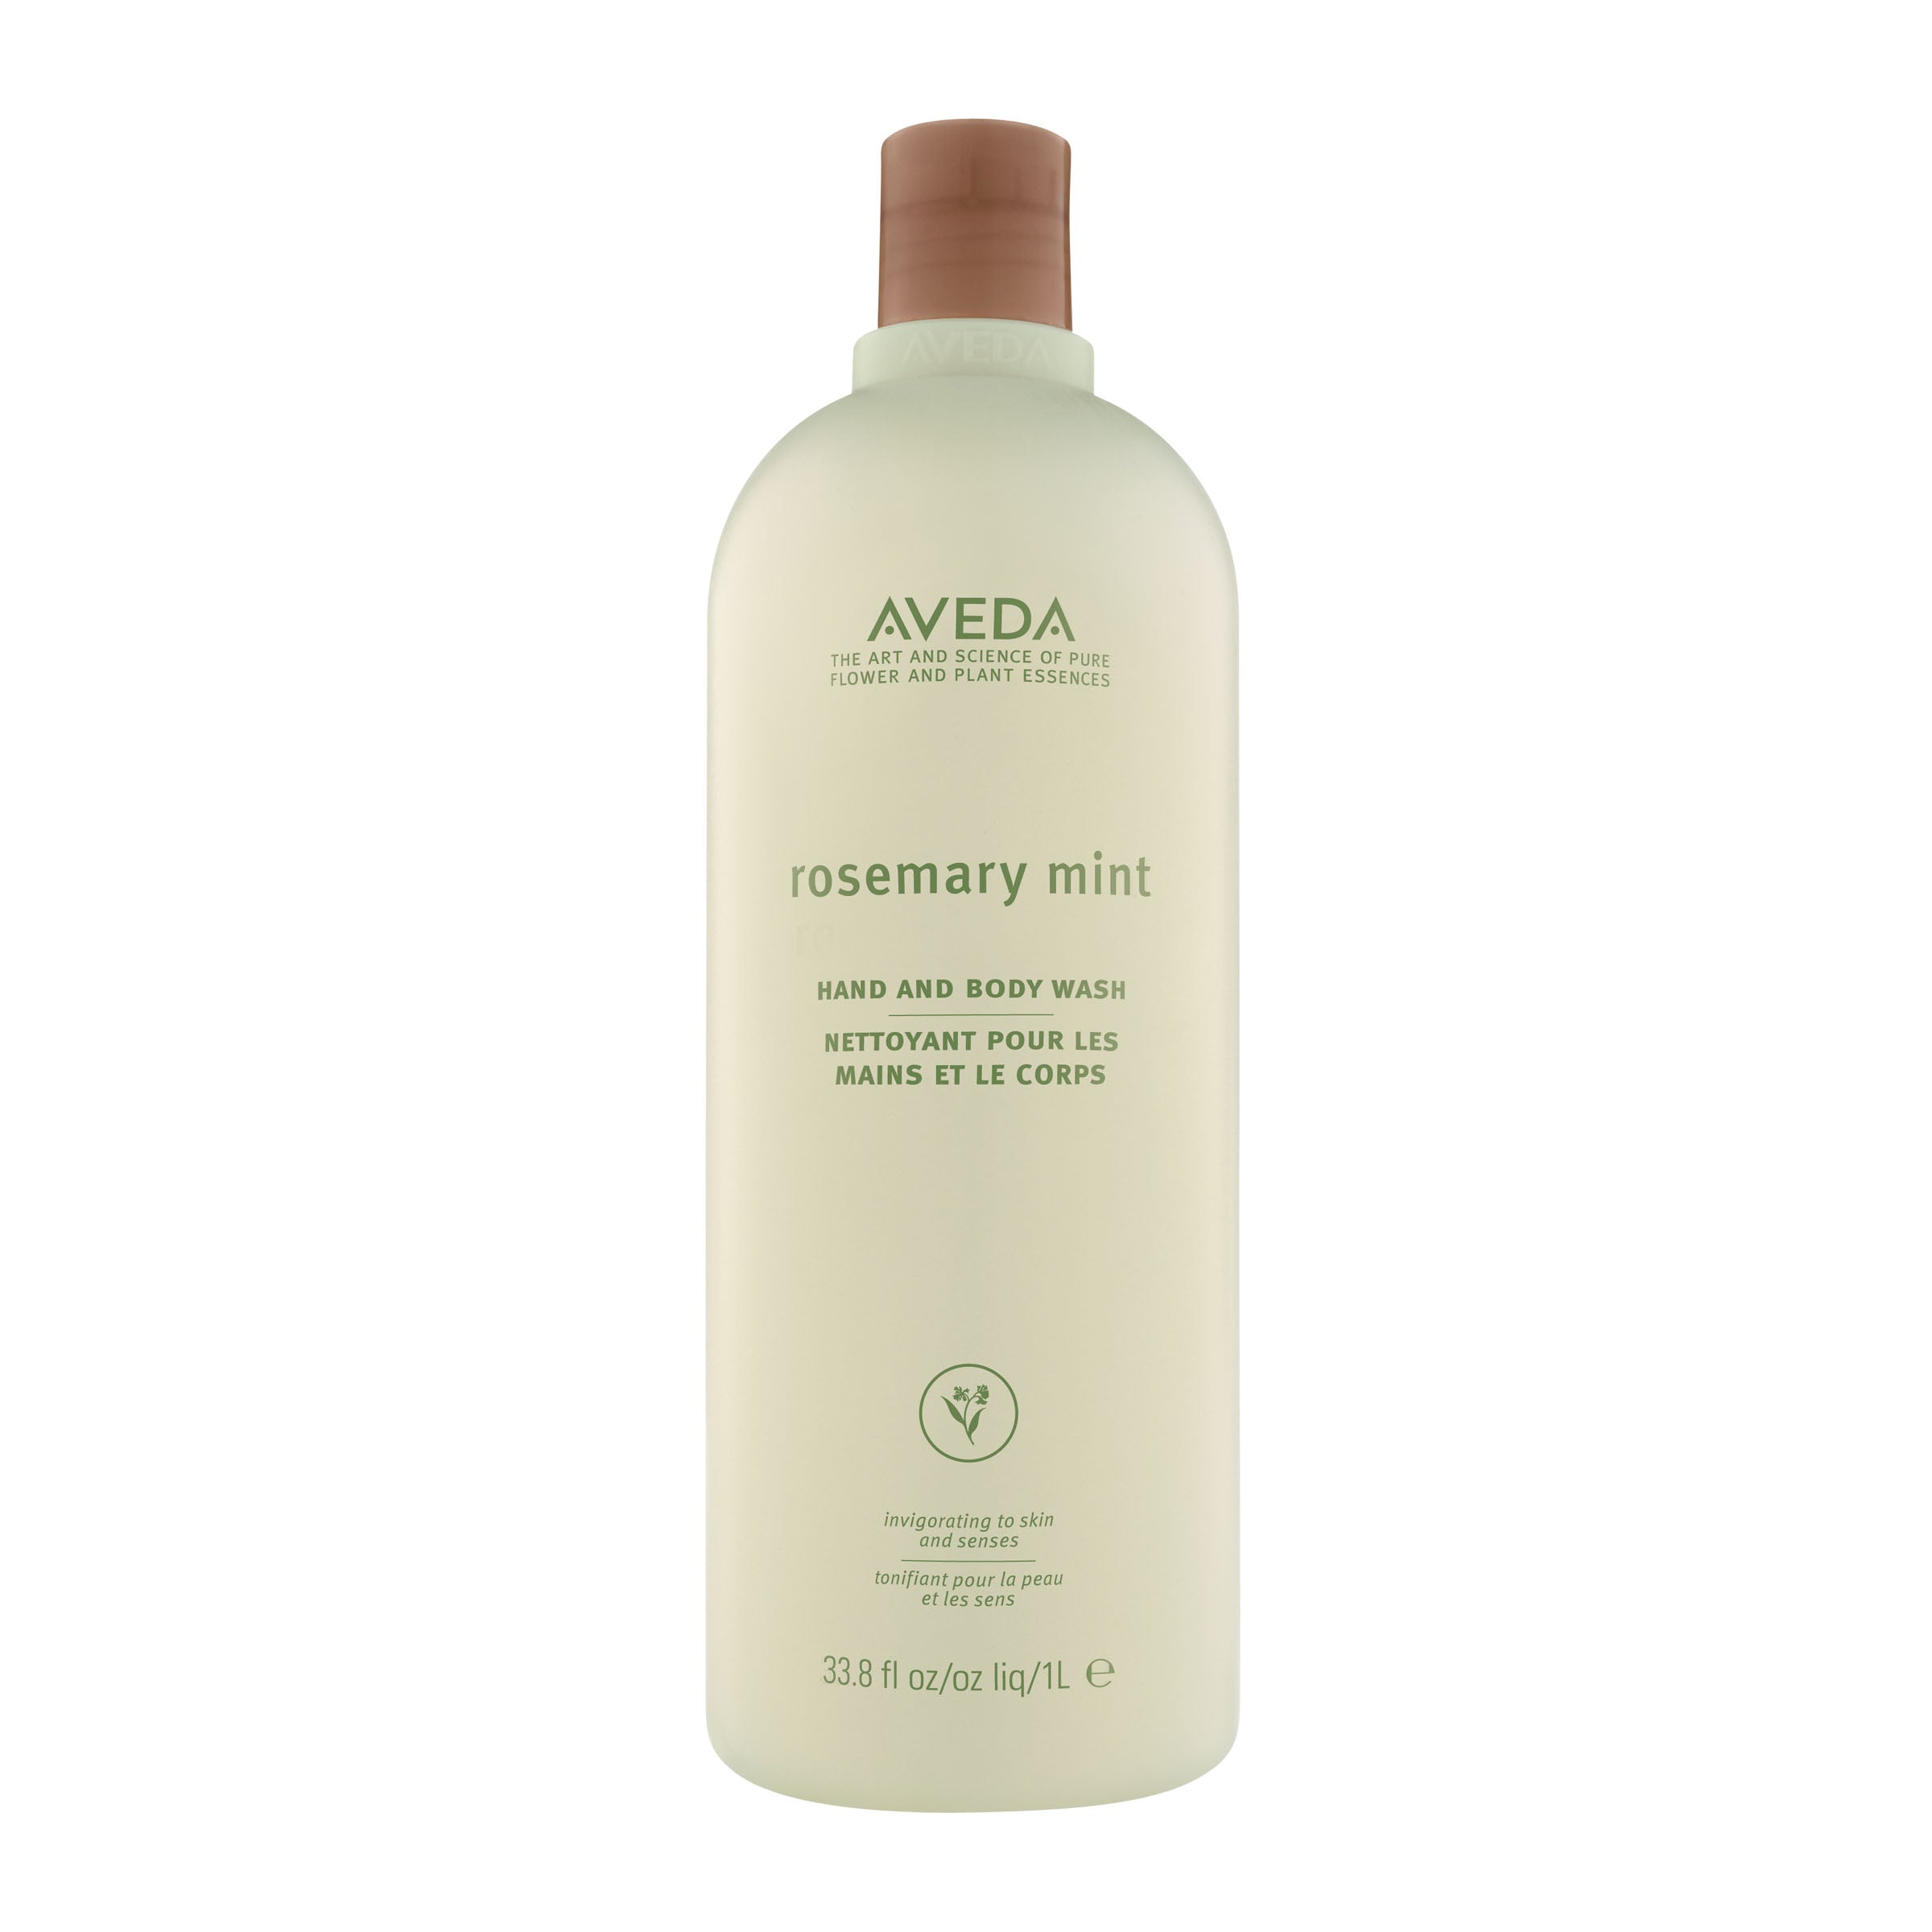 Aveda rosemary mint hand and body wash - 1 litre